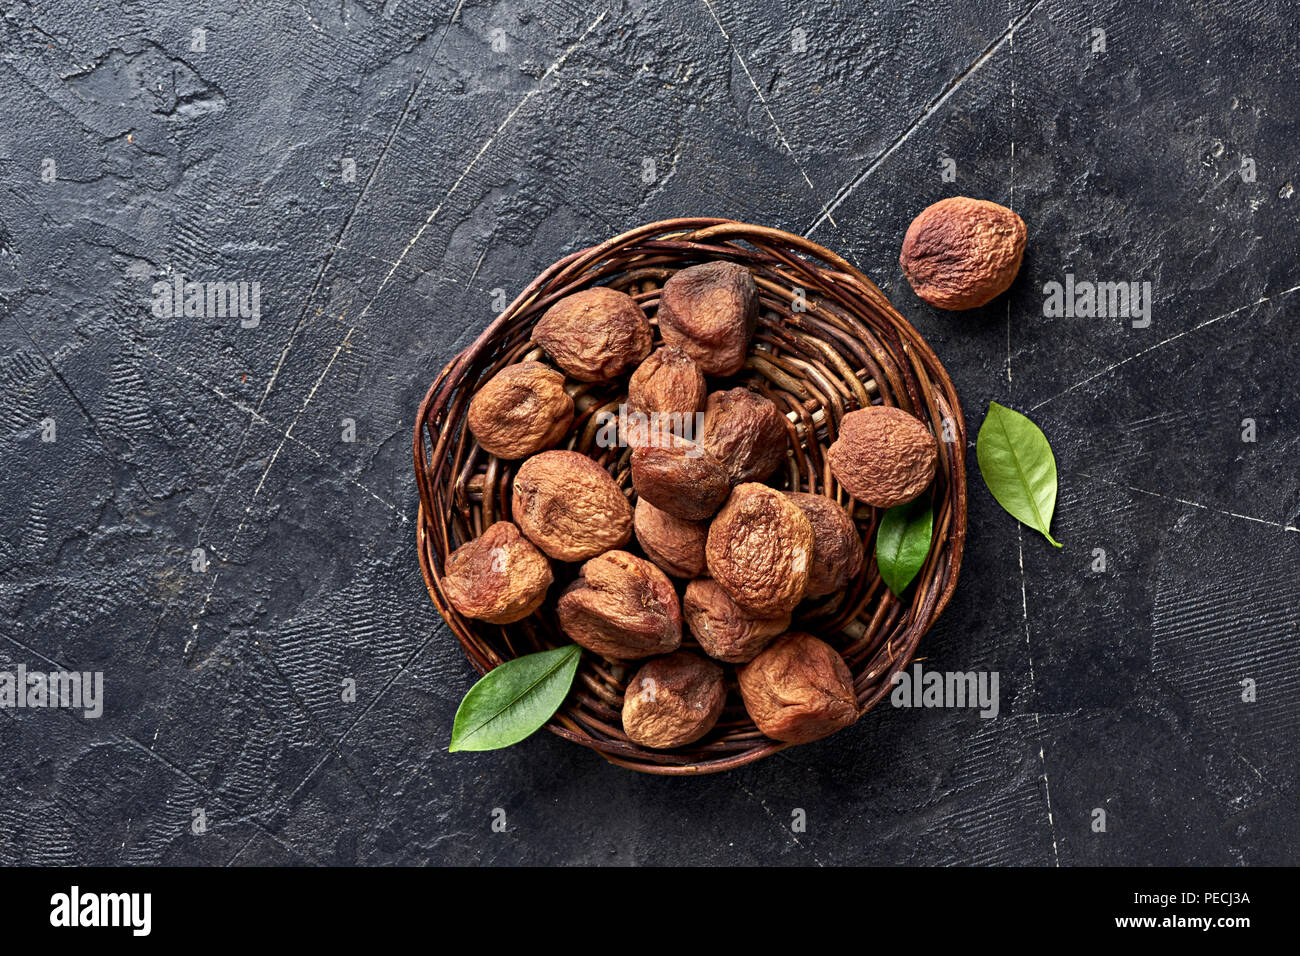 Sun dried apricots on black background. Fruits with green leaves. Top view. Stock Photo